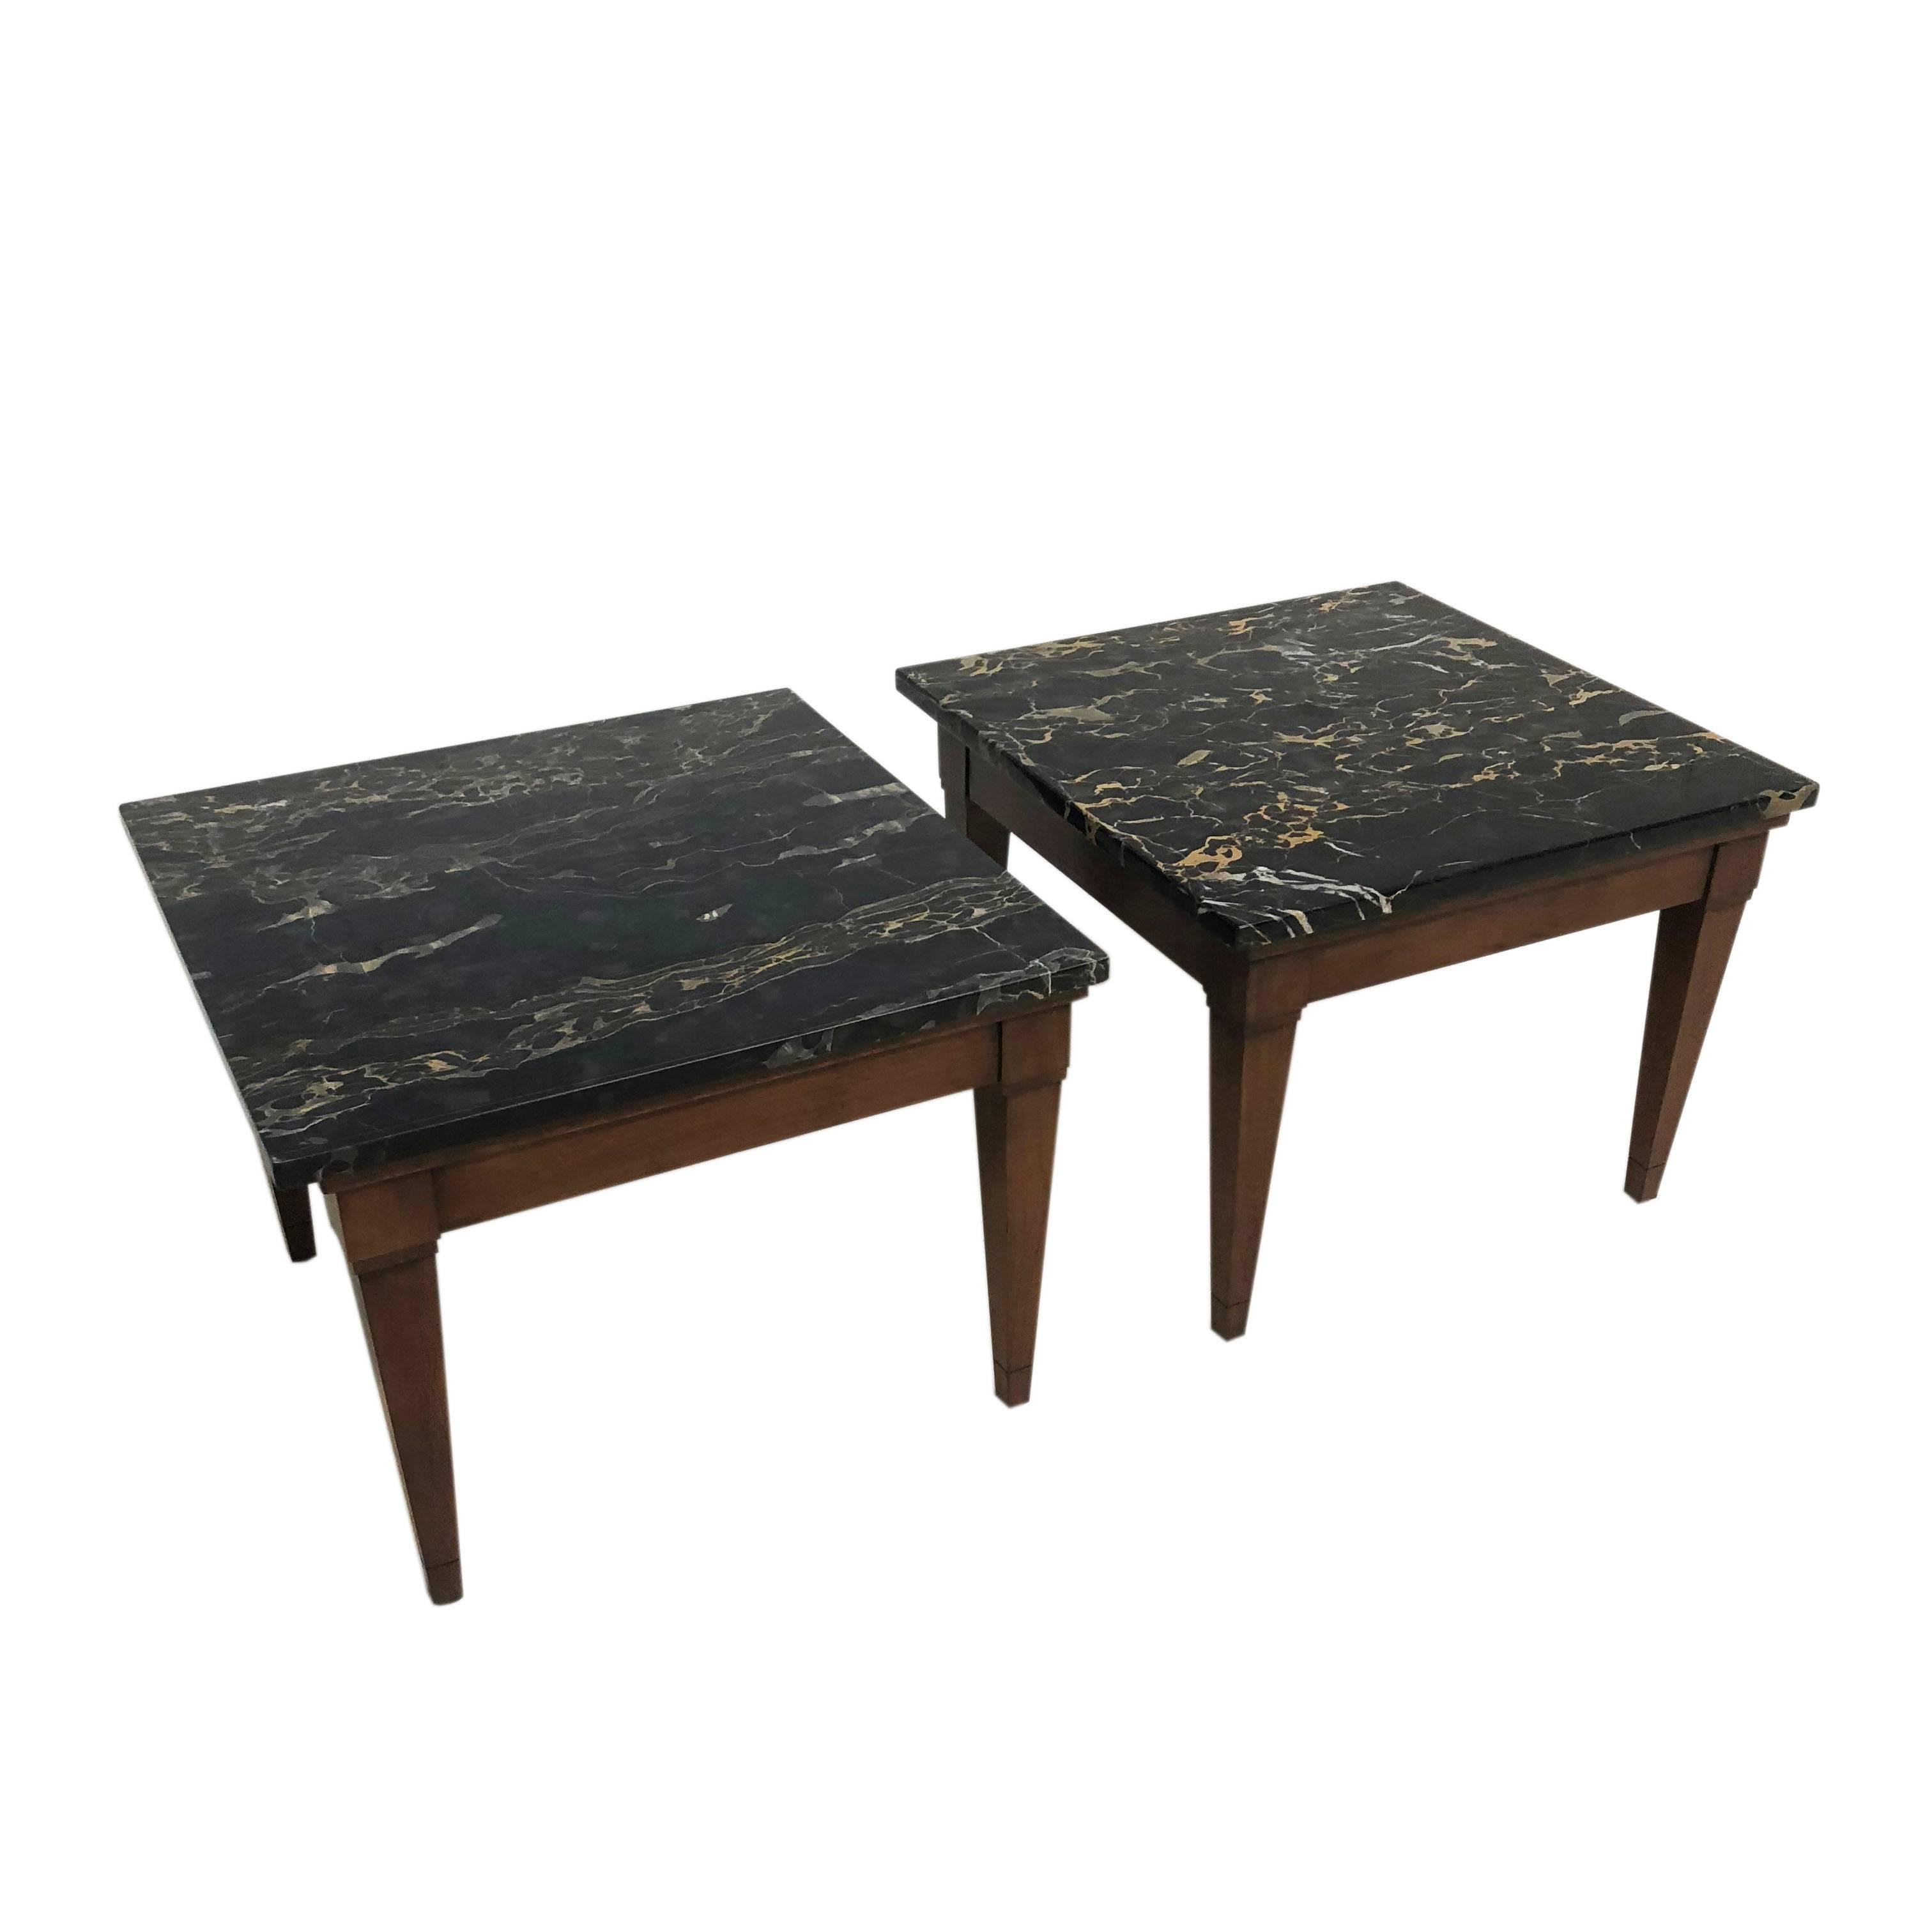 Mid-Century Modern end tables with walnut wood bases and black marble tops made in Italy. Age appropriate wear. Some slight scratching on the stone surface.

Measurements: 22